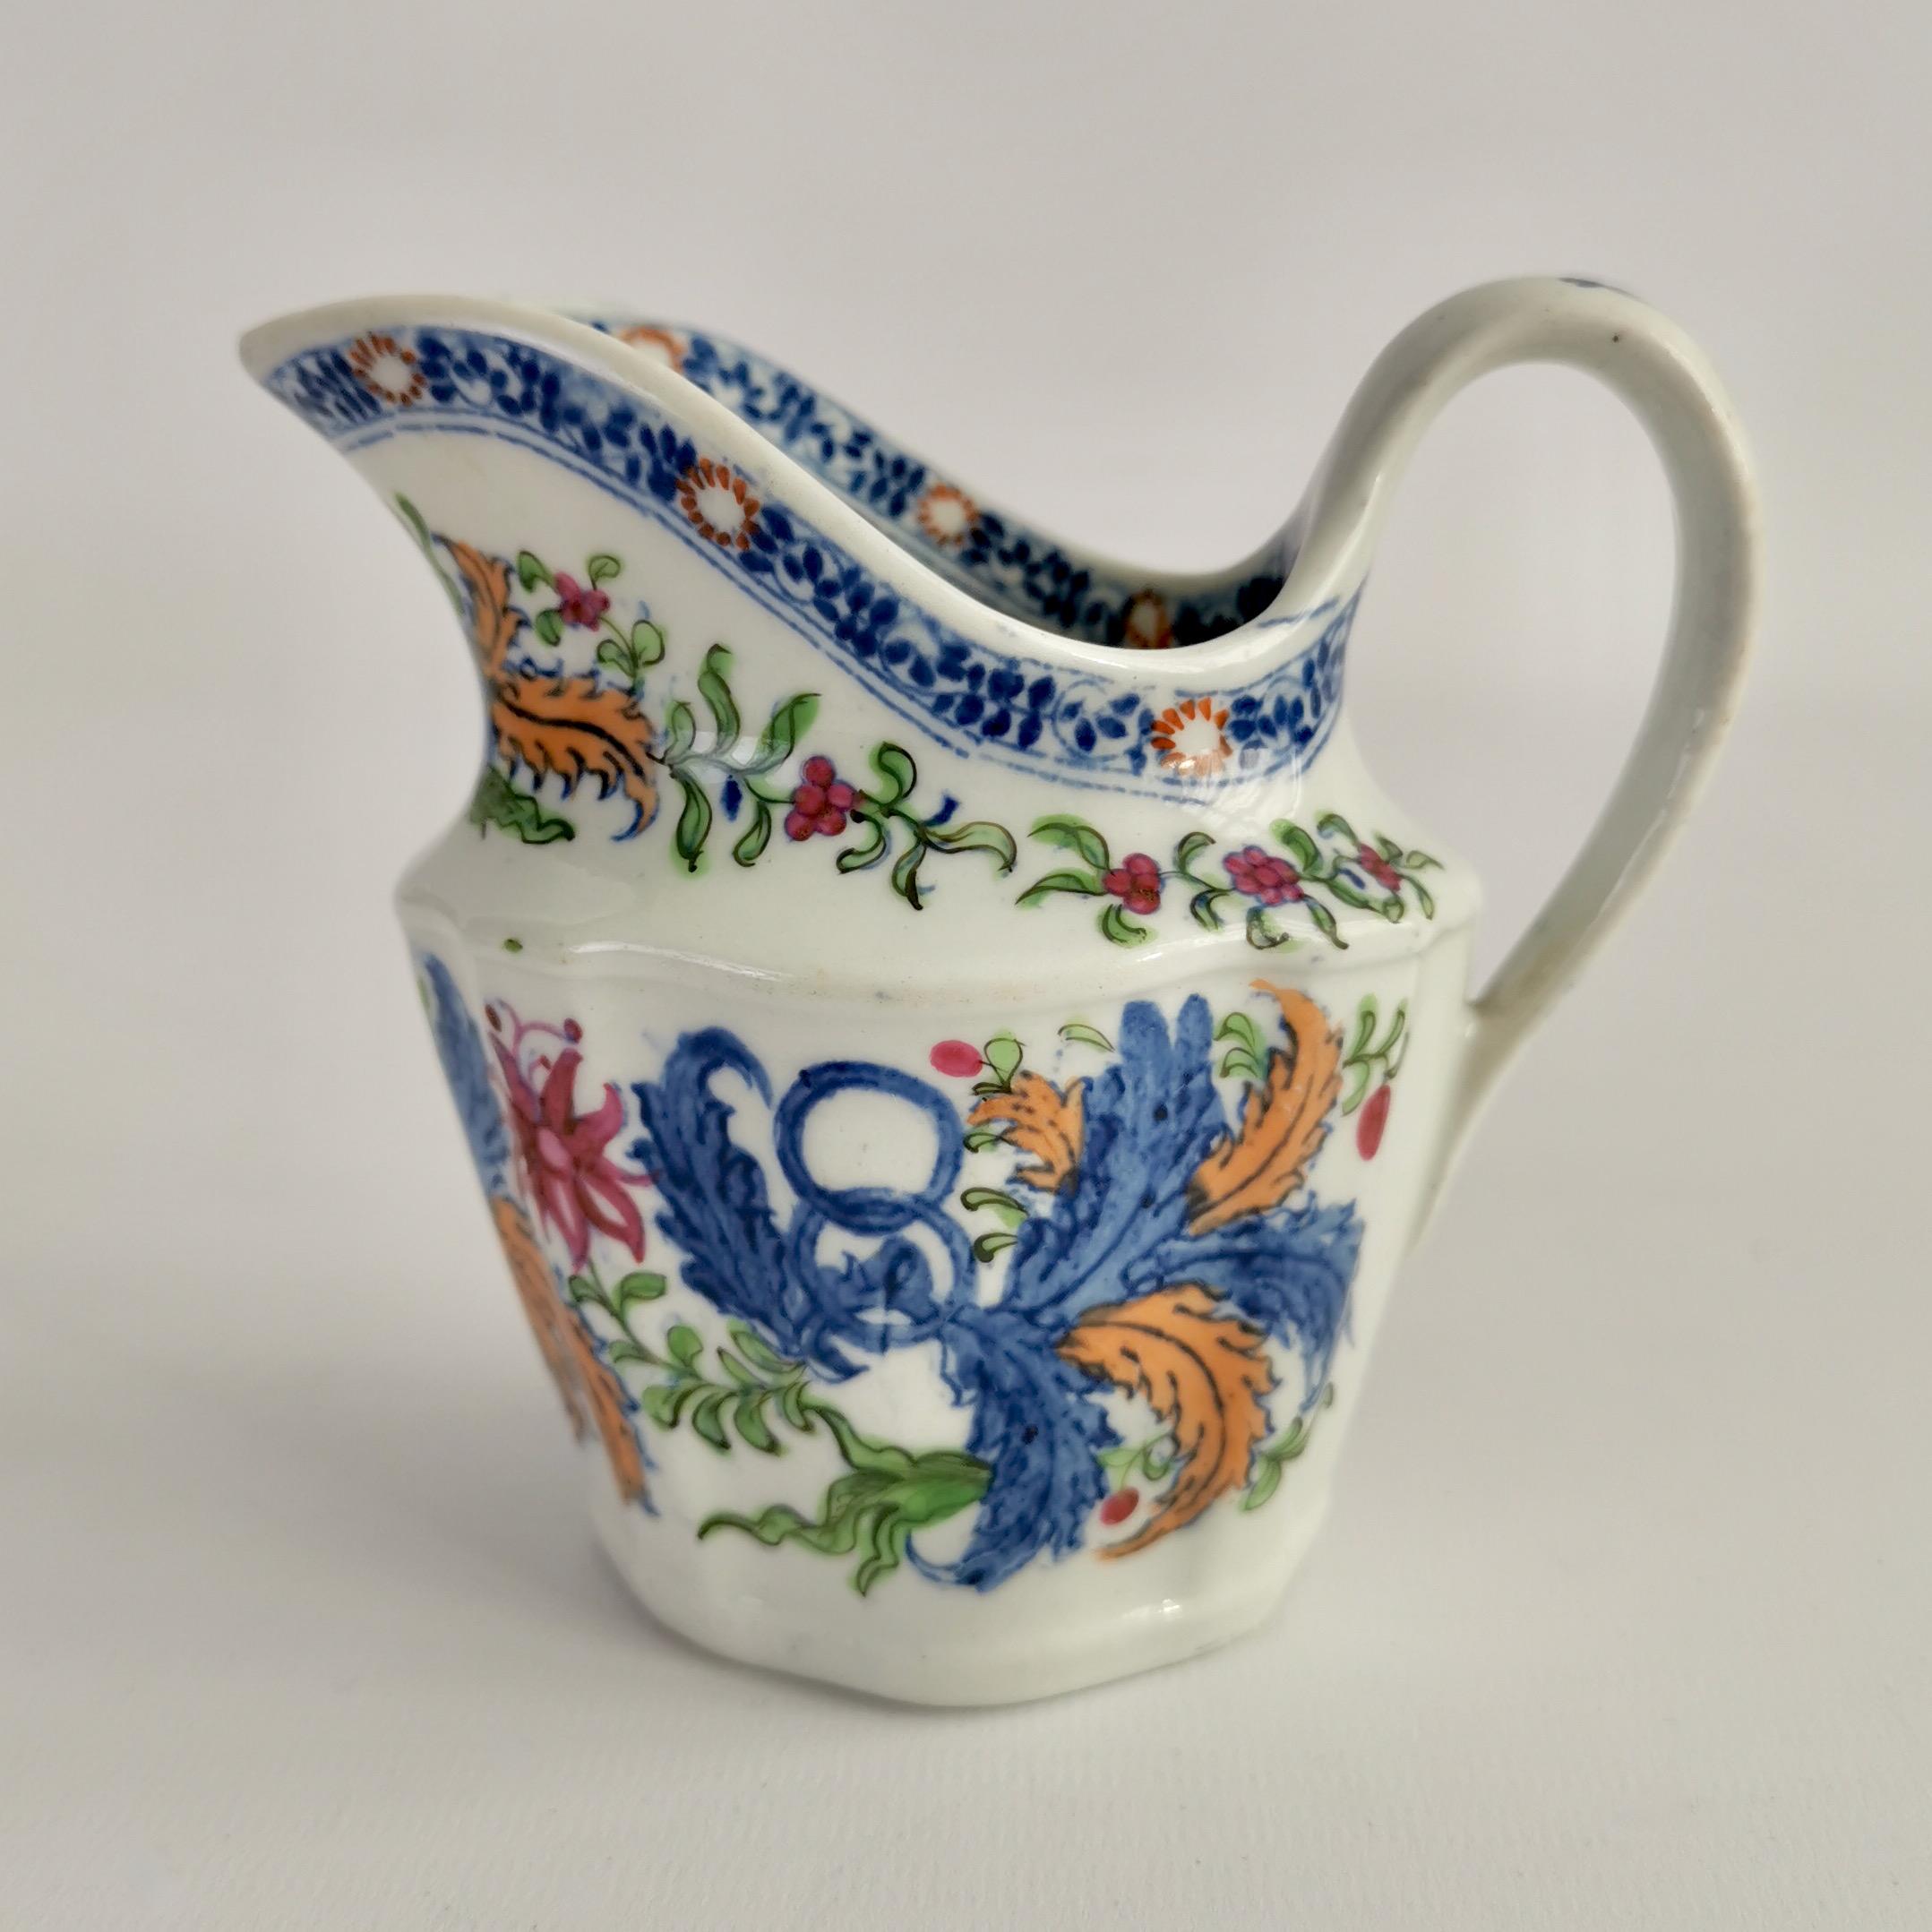 New Hall Porcelain Tea Service, Chinoiserie Flower Sprays, Georgian, circa 1795 In Good Condition For Sale In London, GB